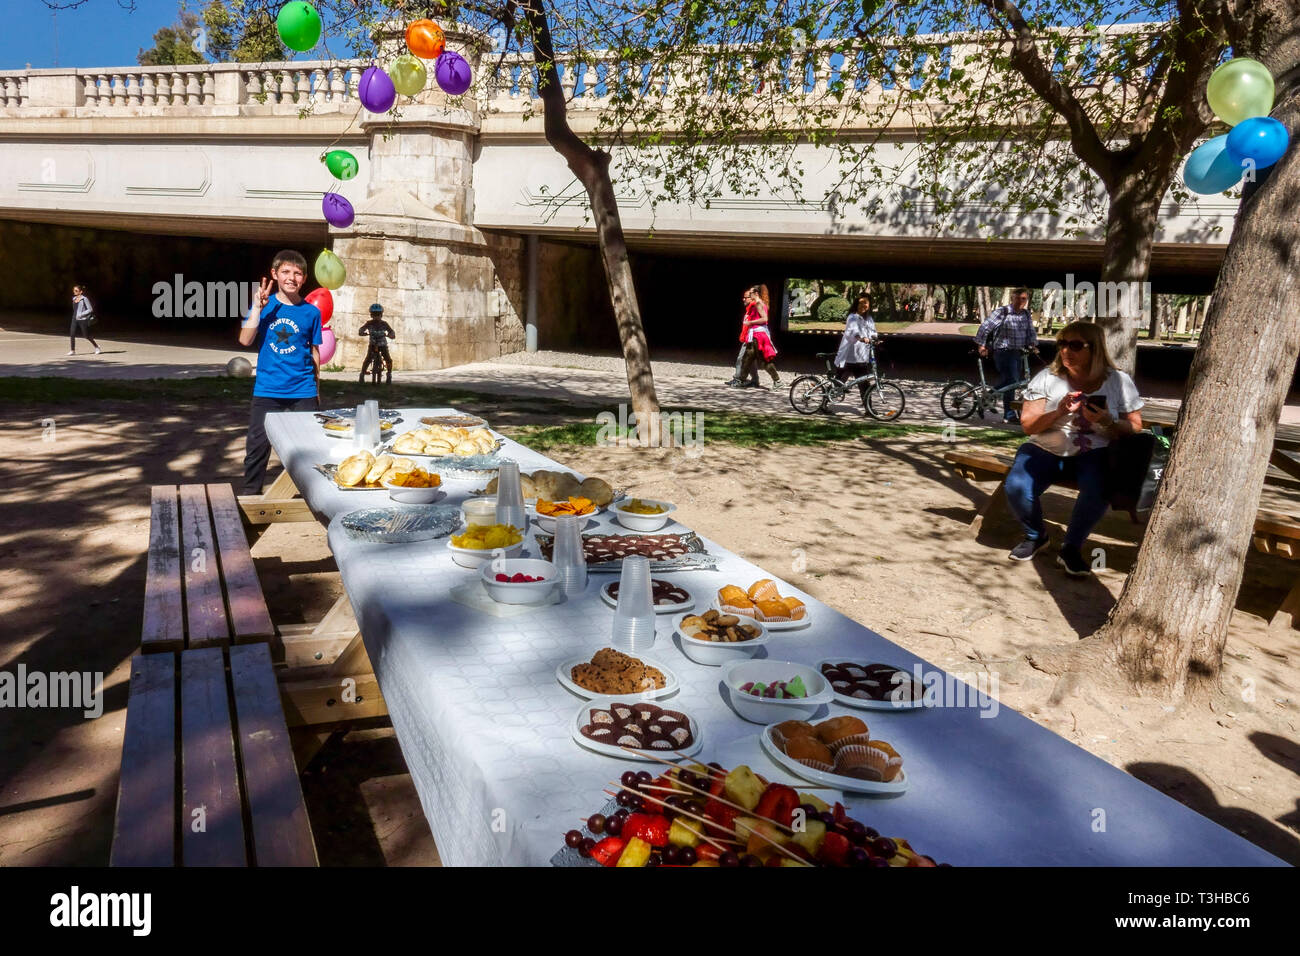 Picnic and children's birthday party in Turia gardens Valencia Spain Europe Stock Photo